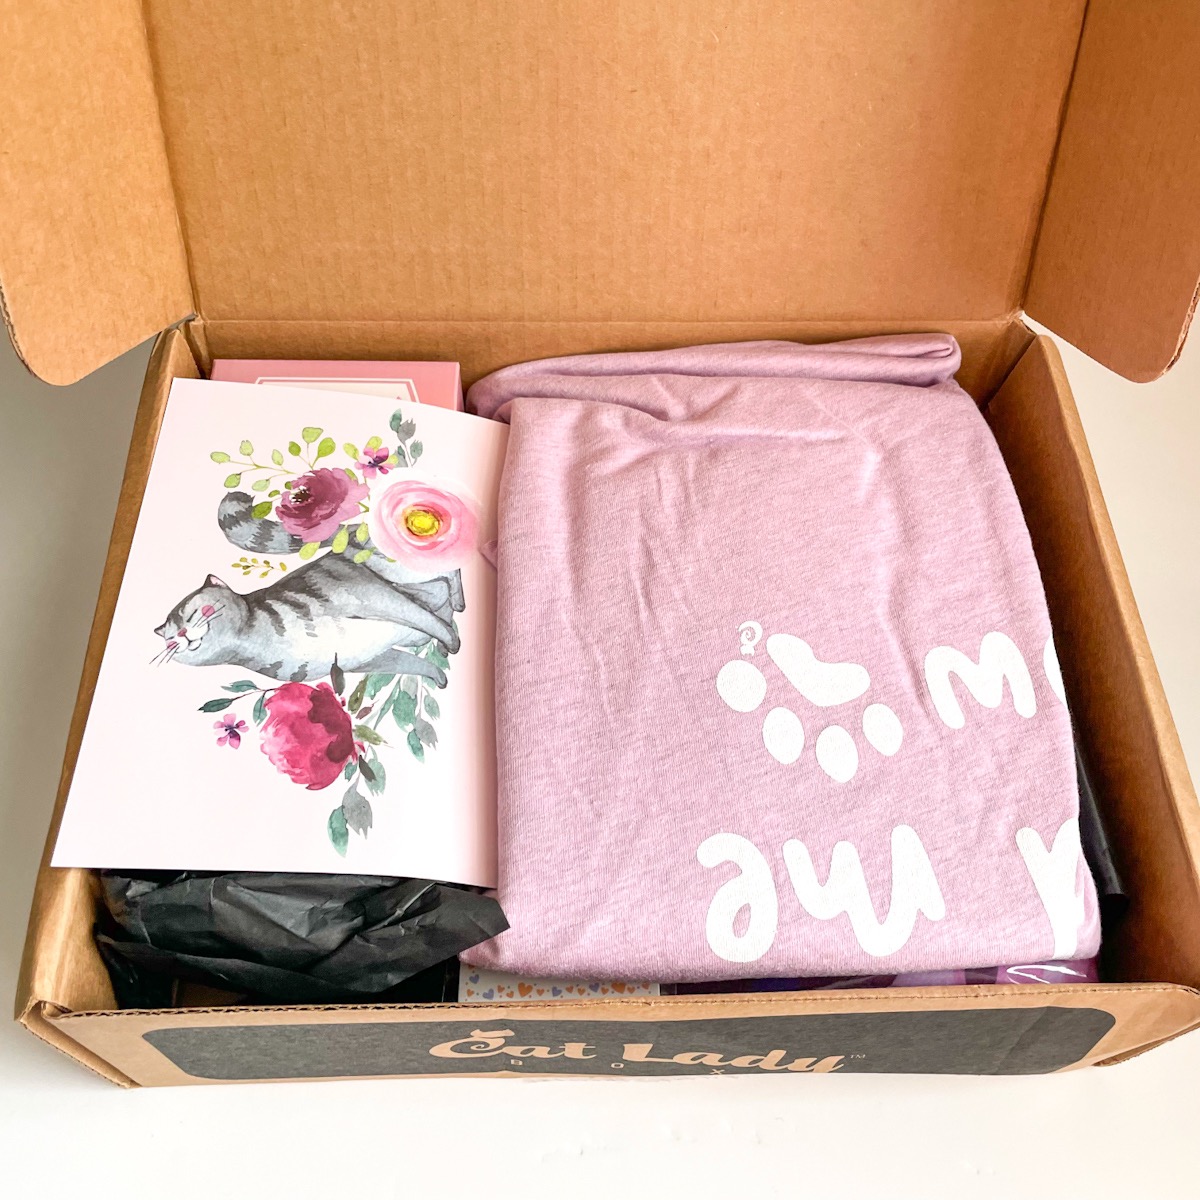 Crazy Cat Lady Box Subscription February 2022 Review + Coupon MSA